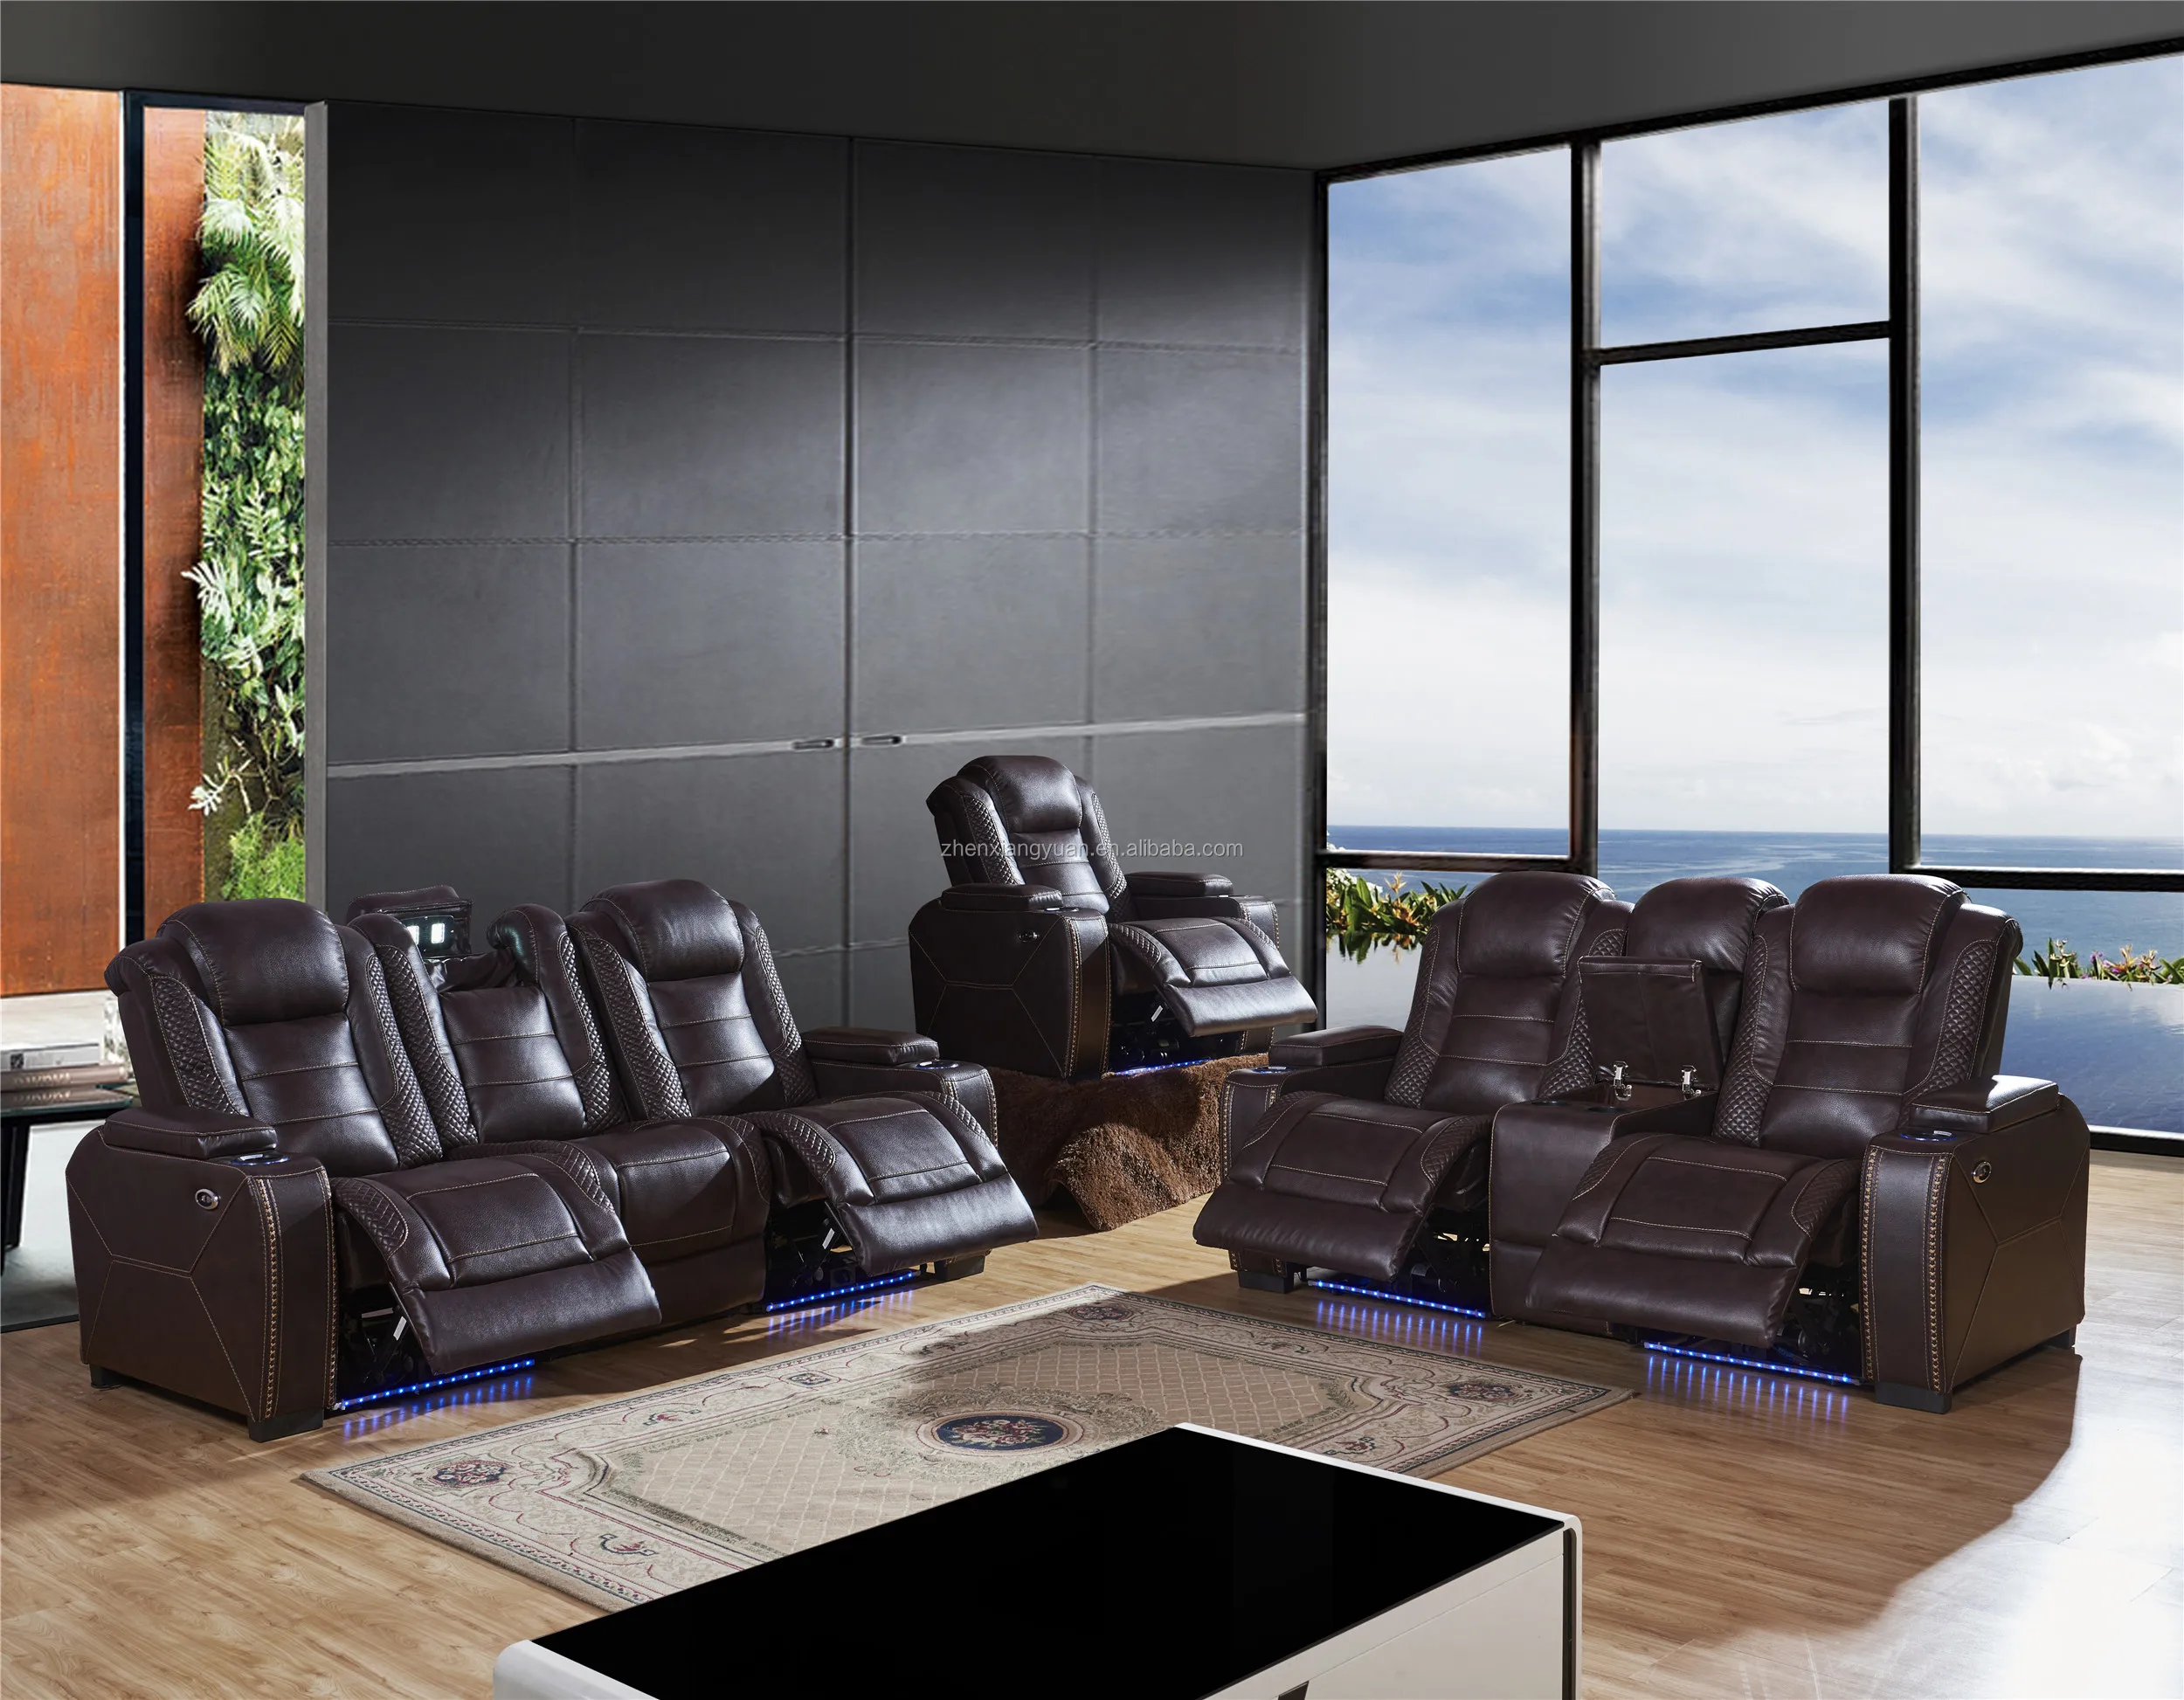 Luxury home theater power recliner chair VIP cinema sofa set  for sale with console